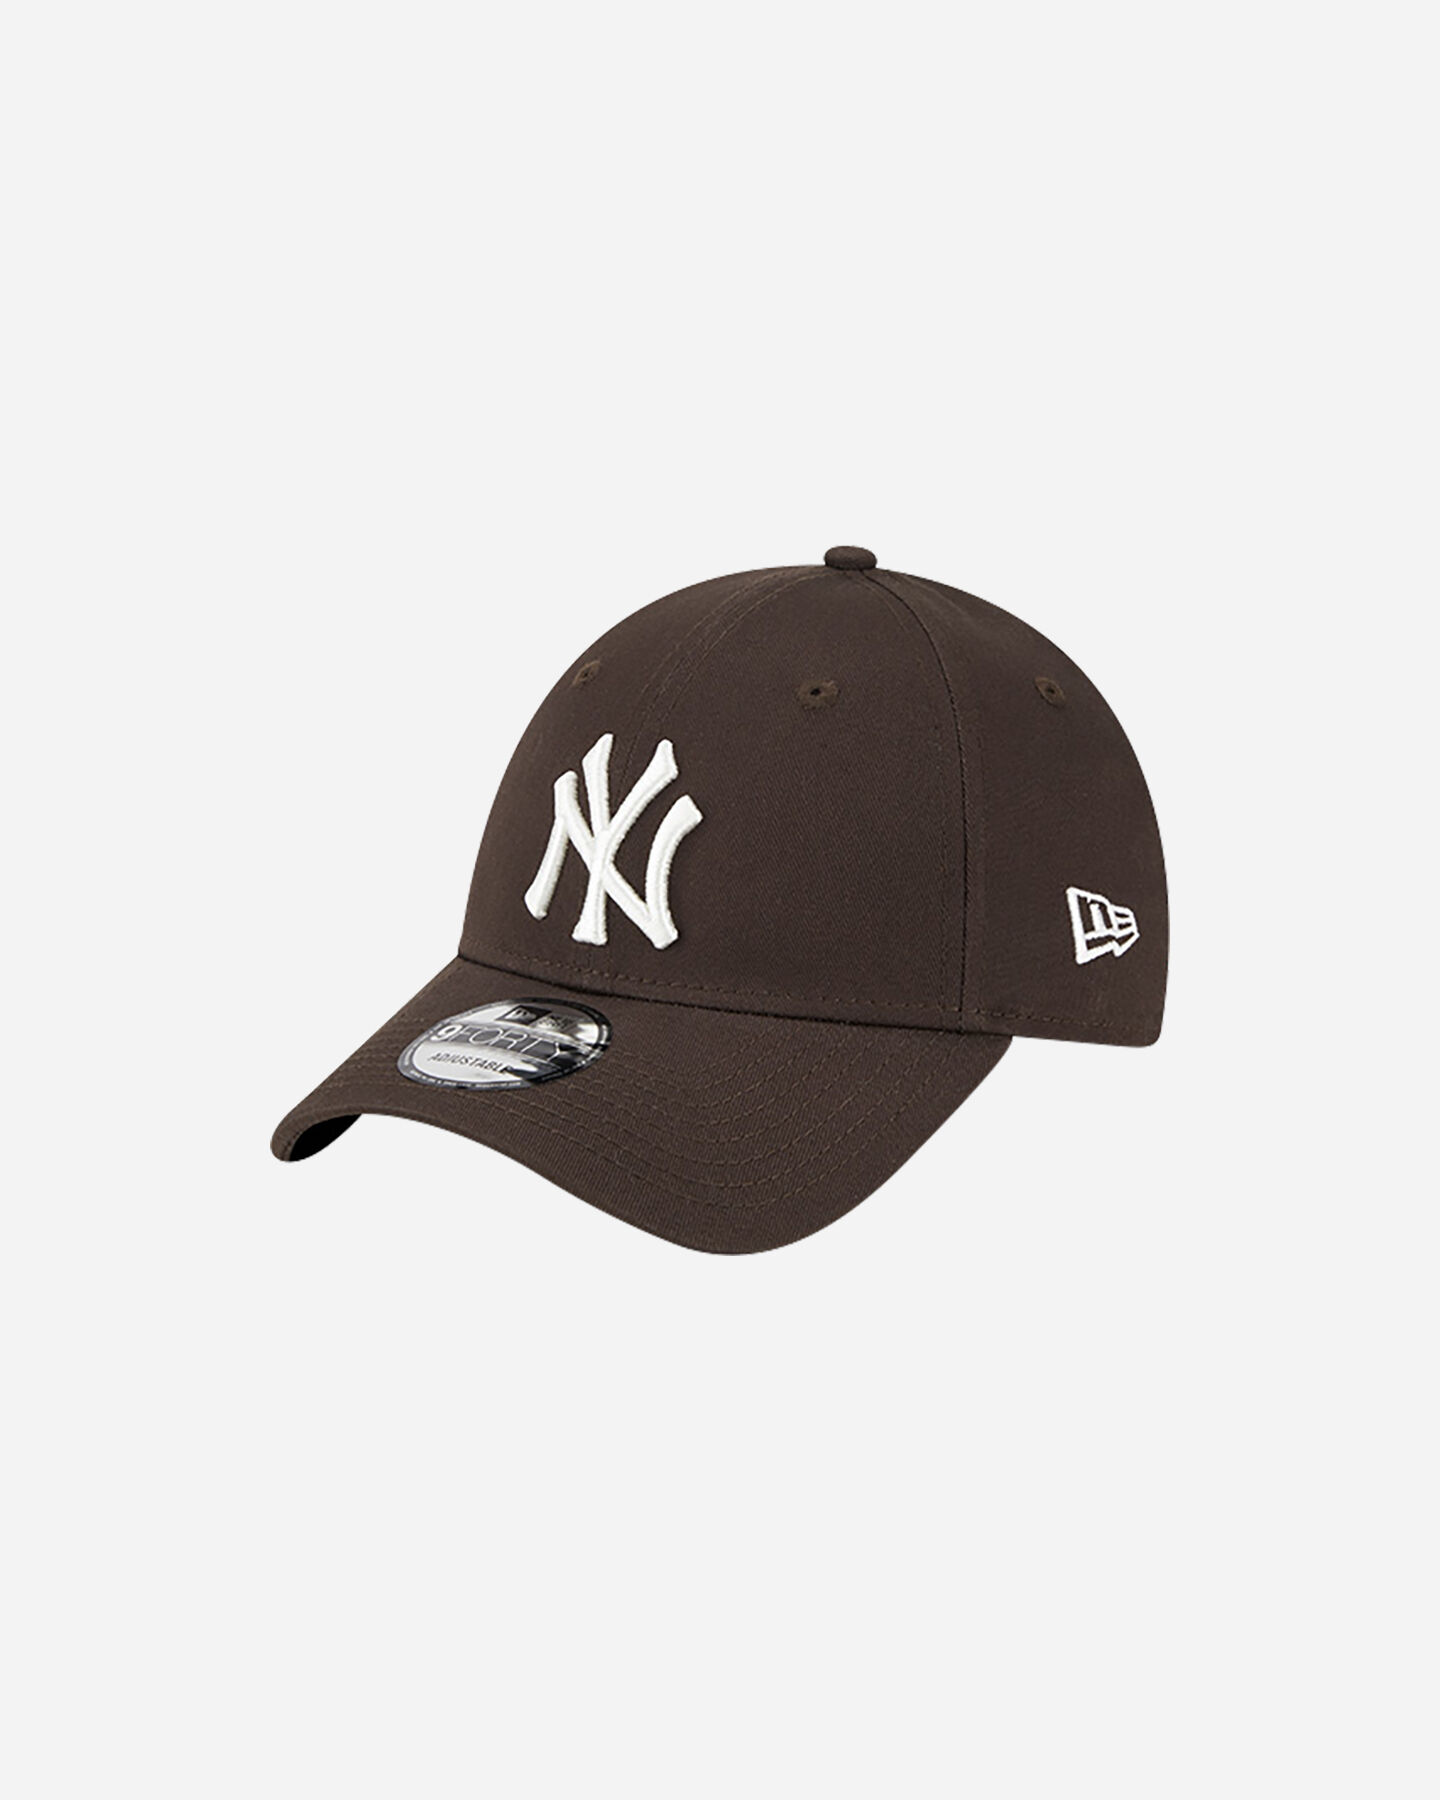  Cappellino NEW ERA 9FORTY MLB LEAGUE NEW YORK YANKEES  S5630960|201|OSFM scatto 0